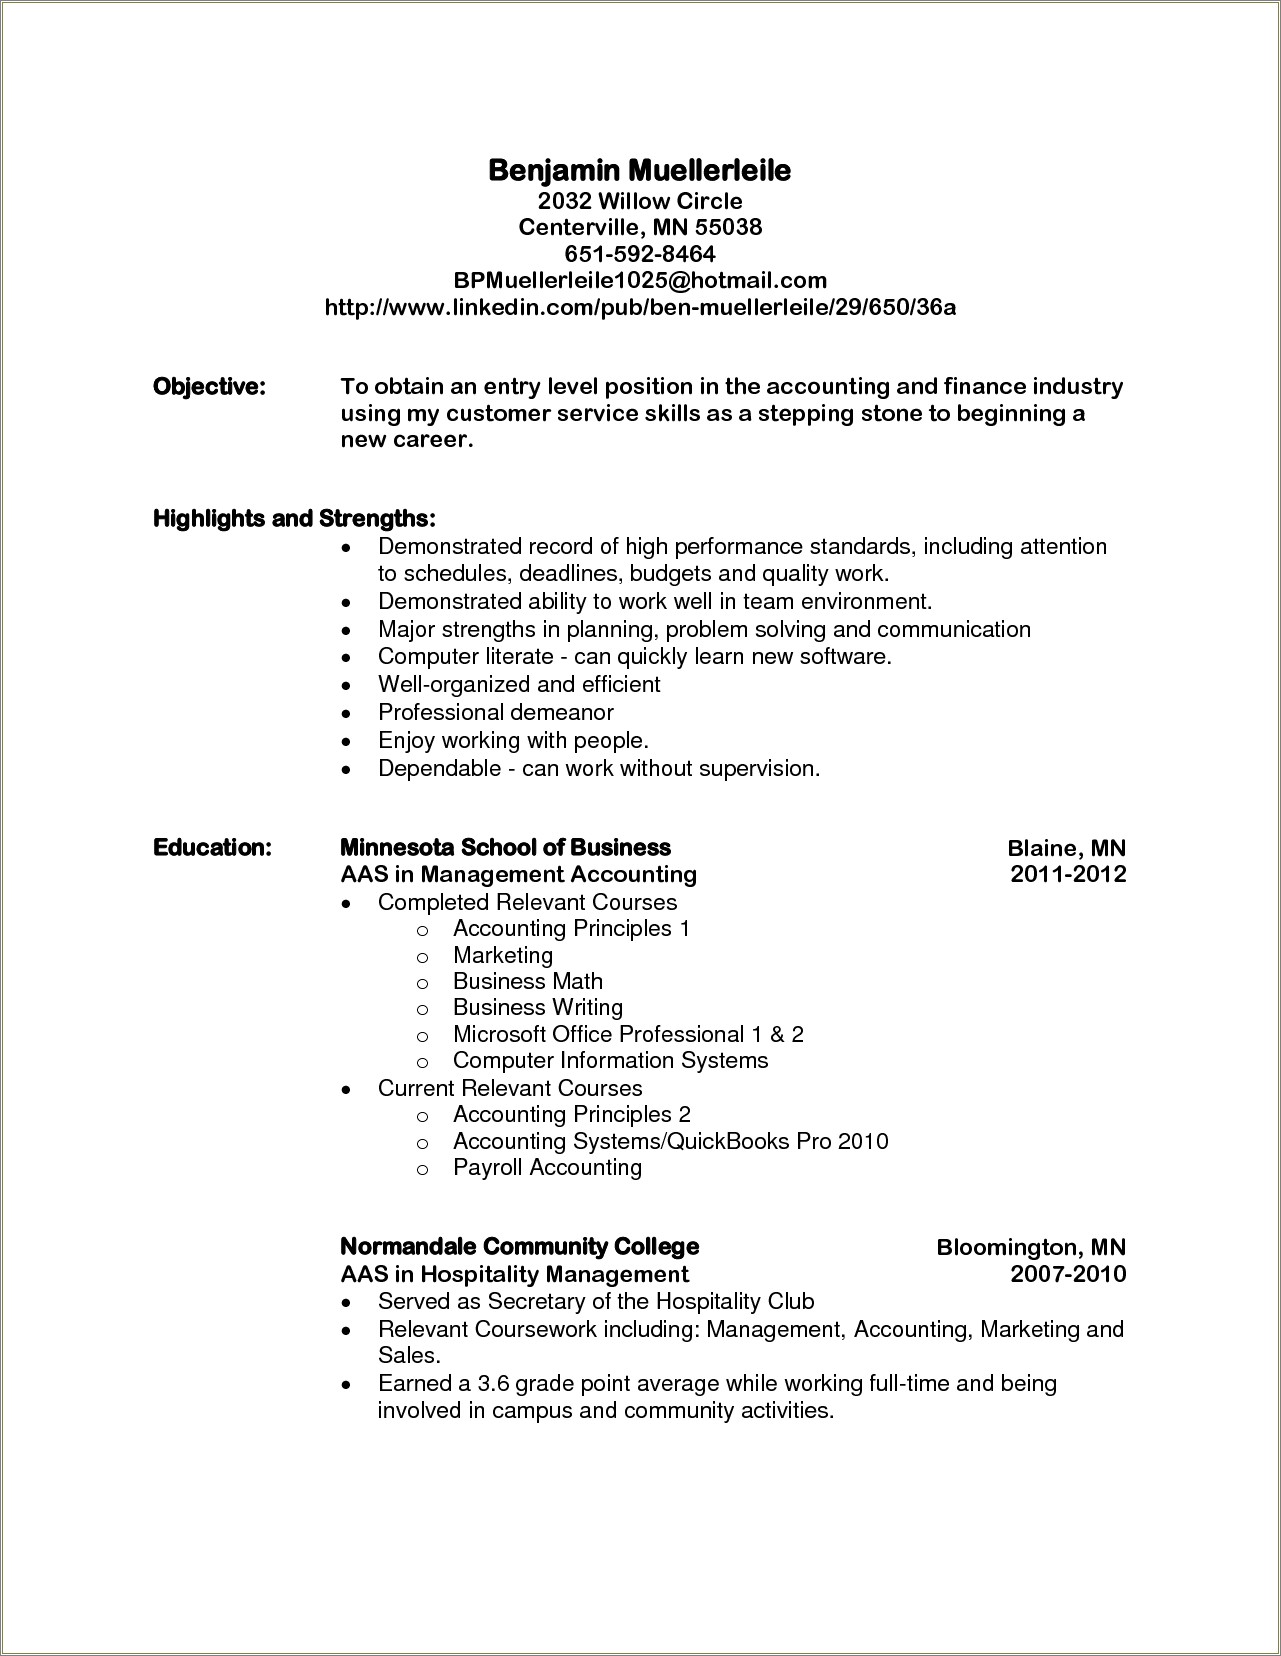 General Resume Objectives Entry Level